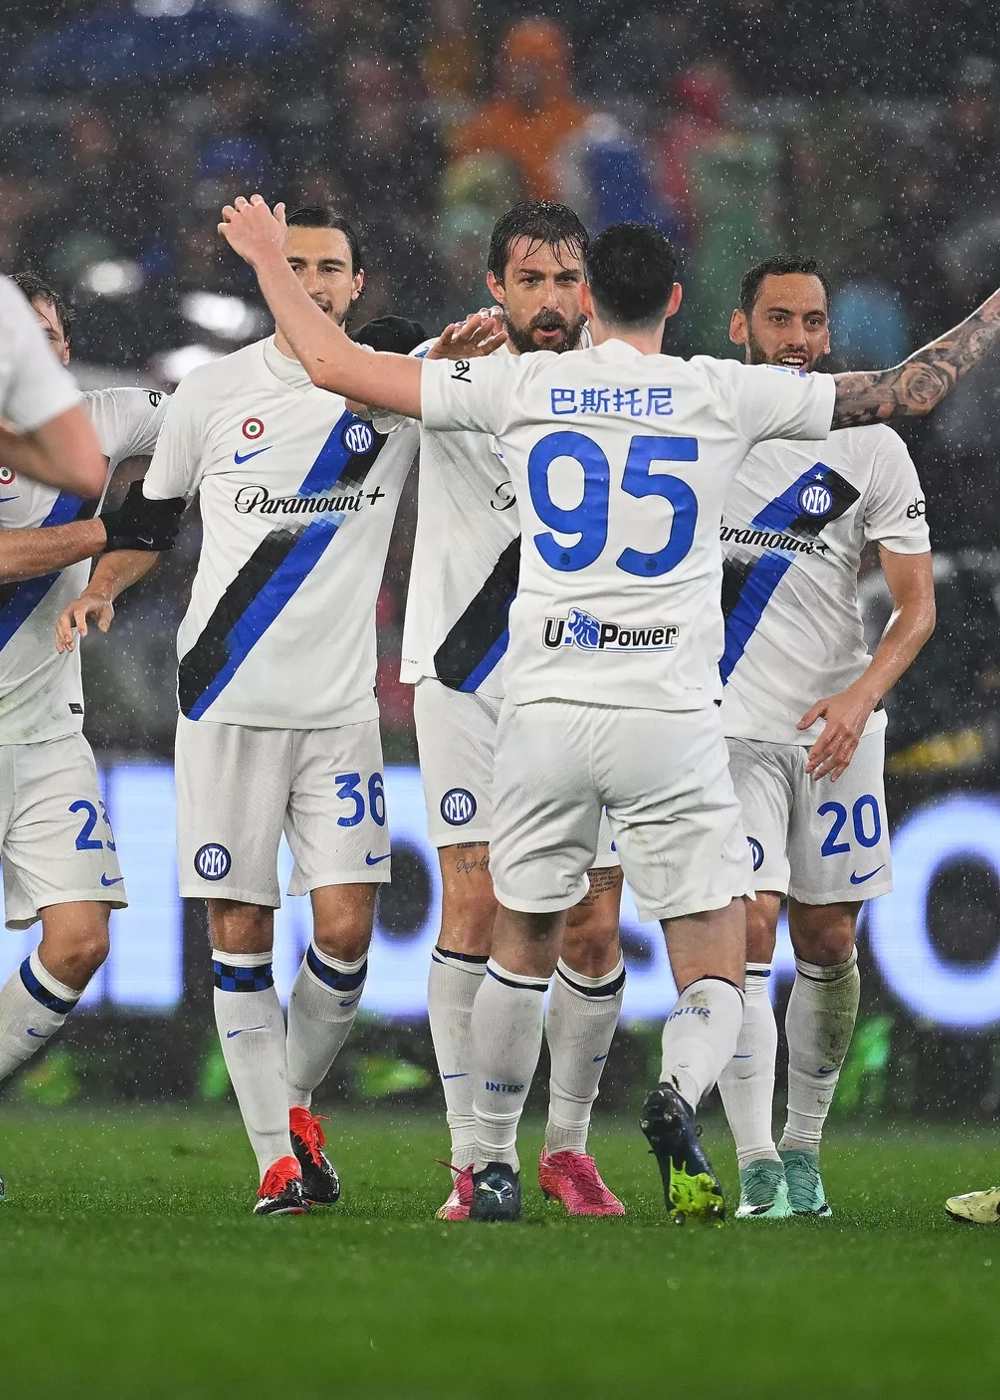 AS Roma 2-4 Internazionale: Inter fight back for crucial win to